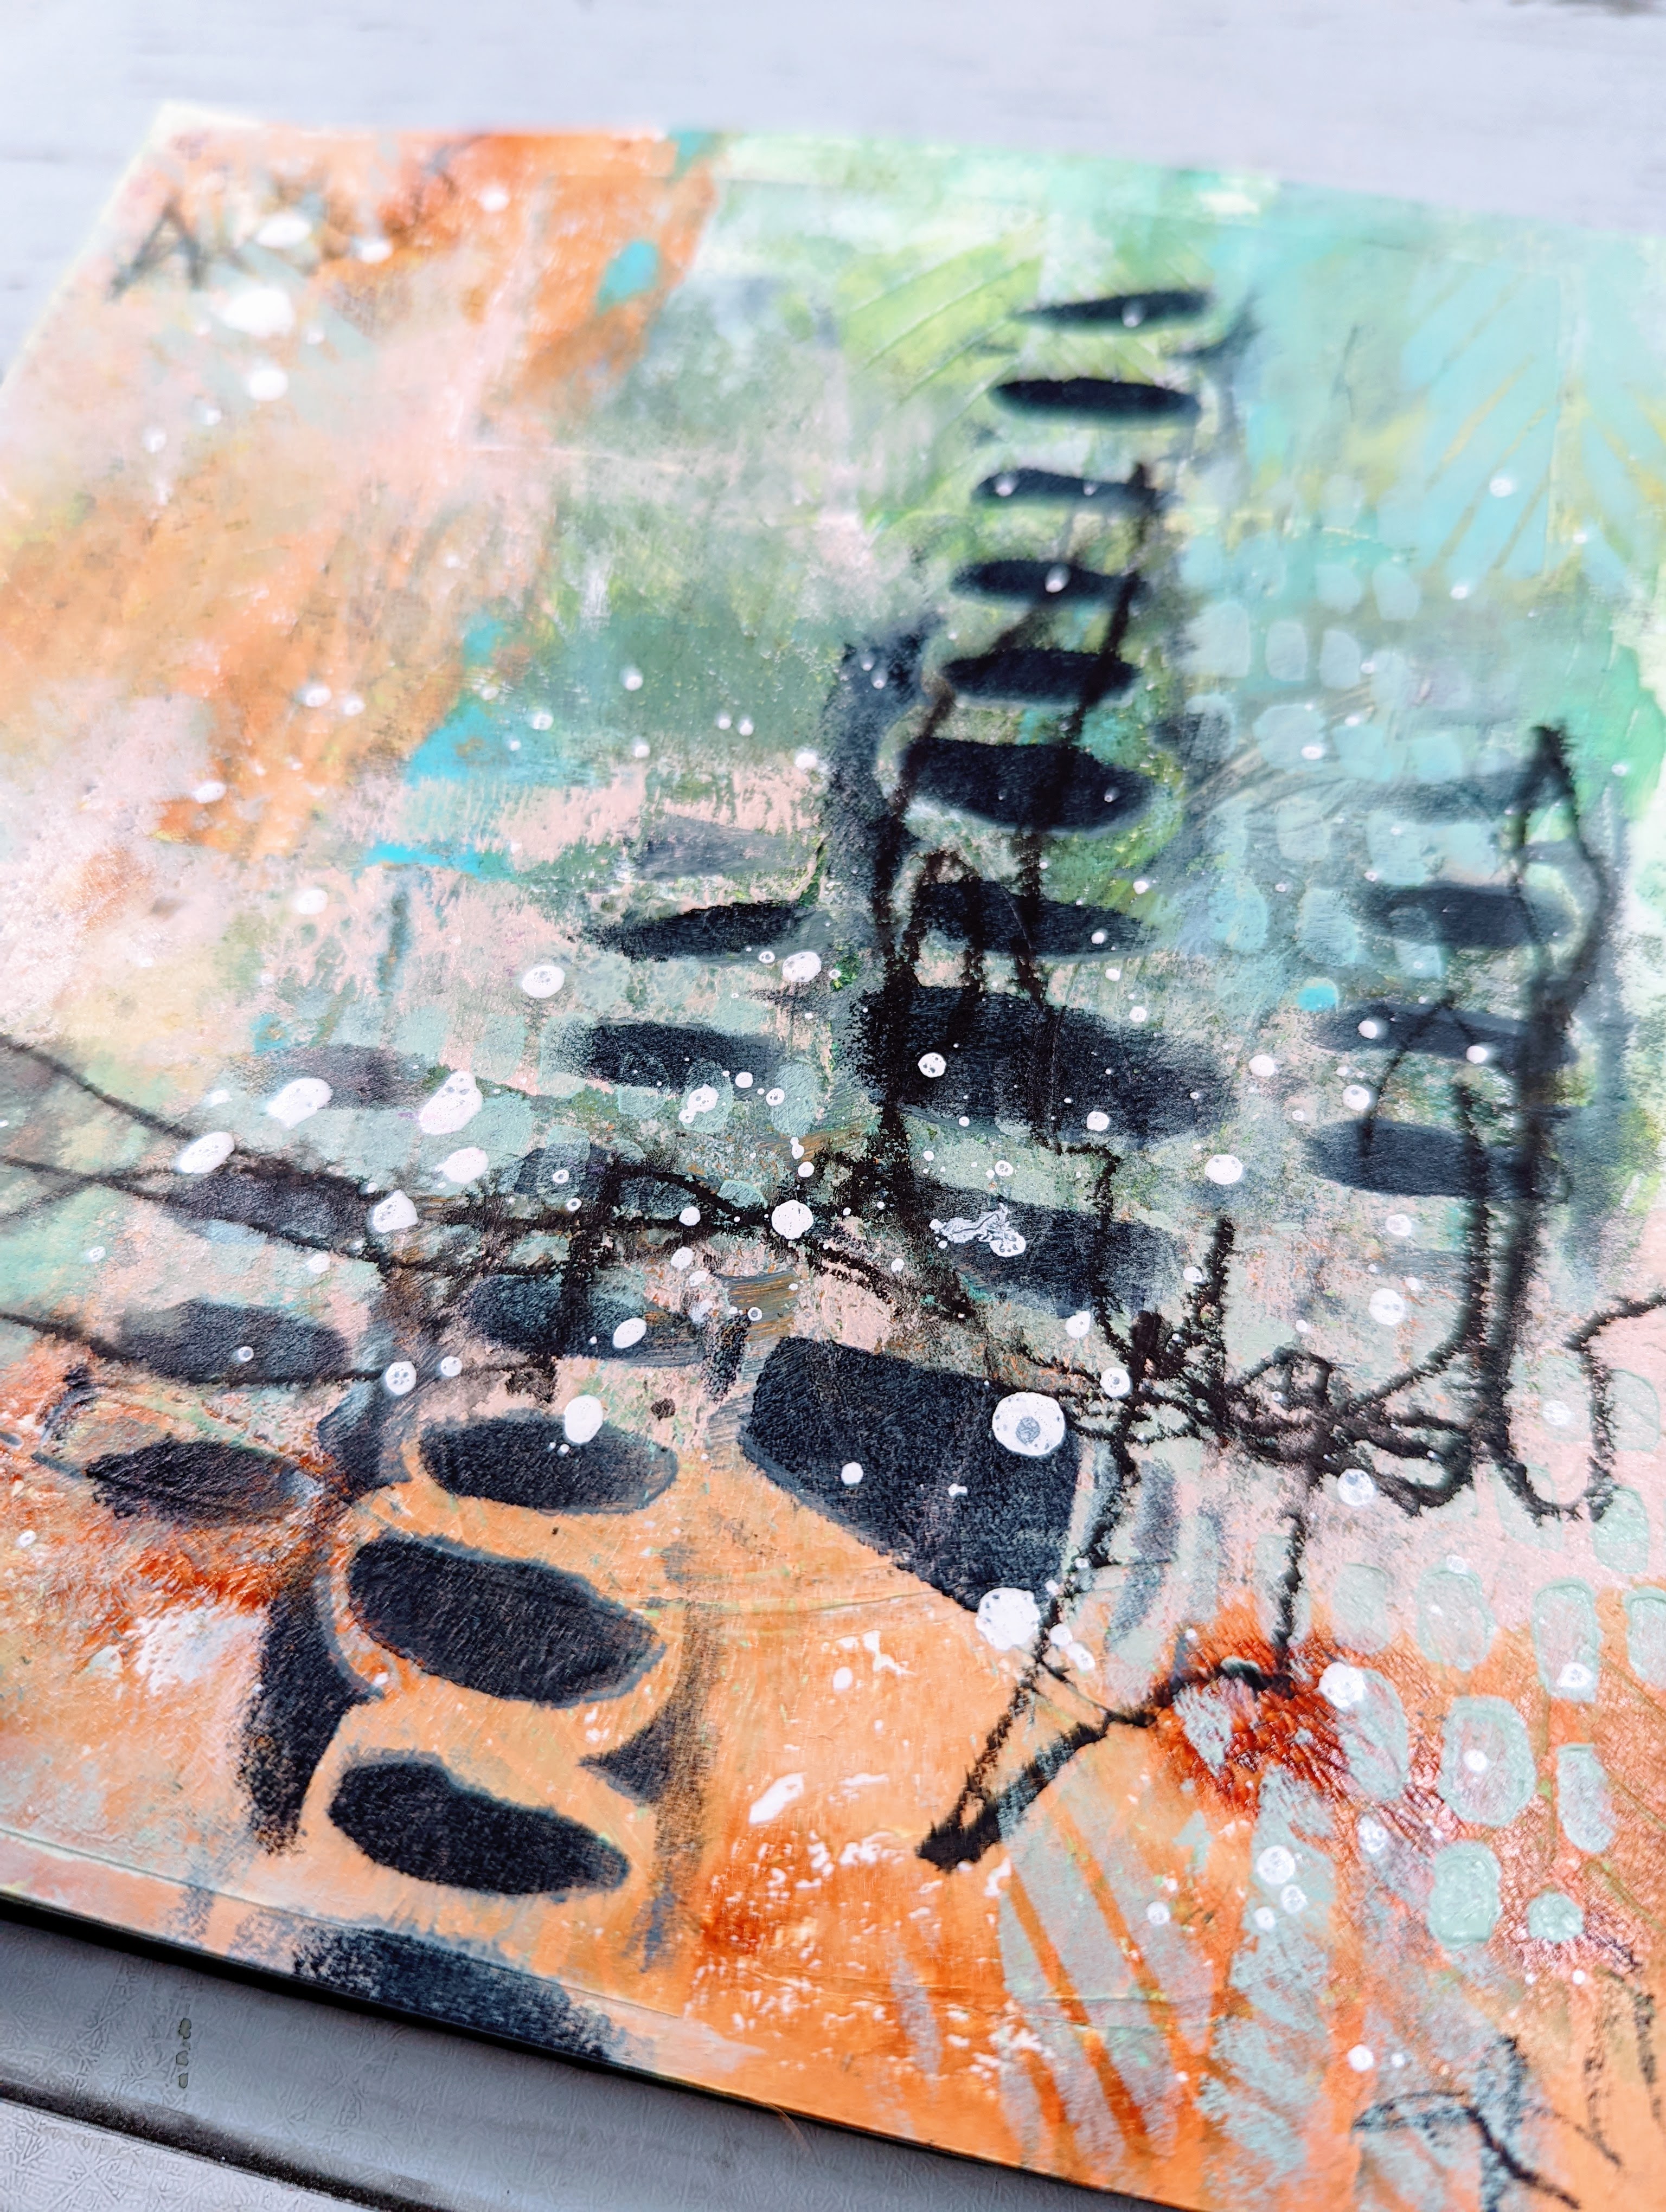 Playing with Gelli Plates - Strathmore Artist Papers